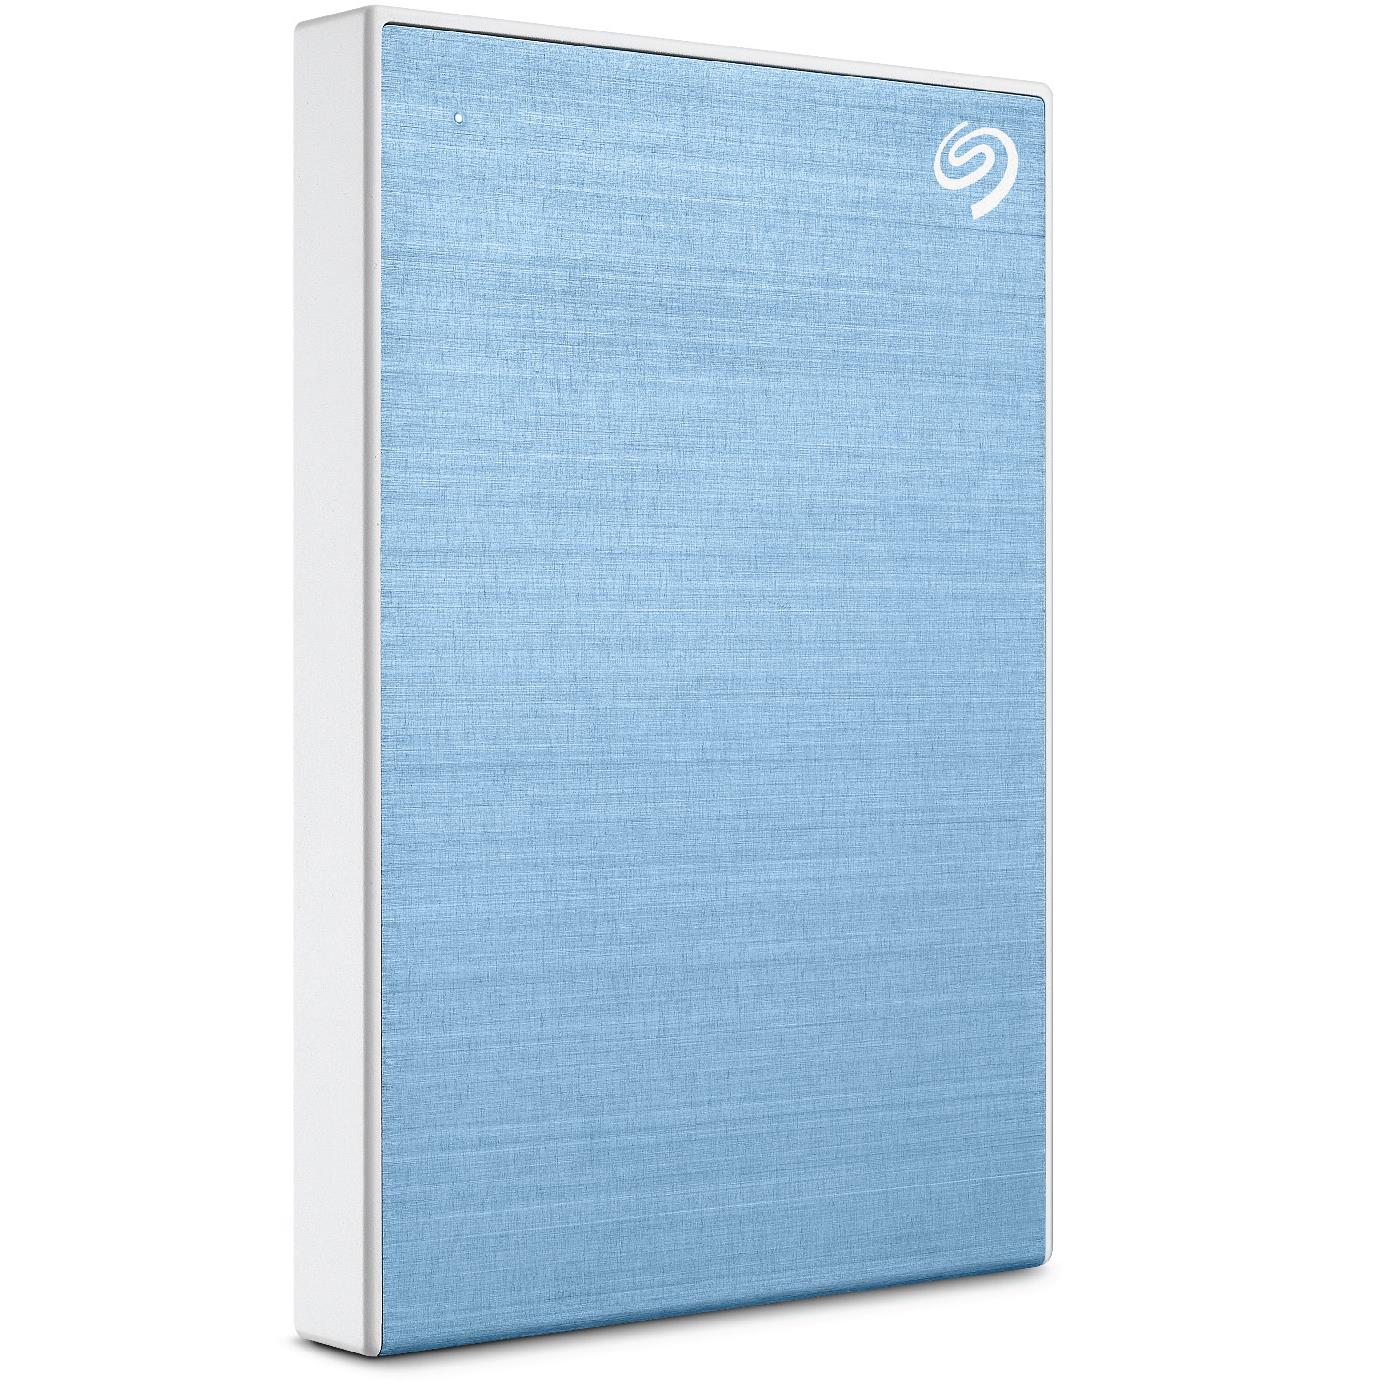 seagate one touch portable 1tb hard drive (blue)